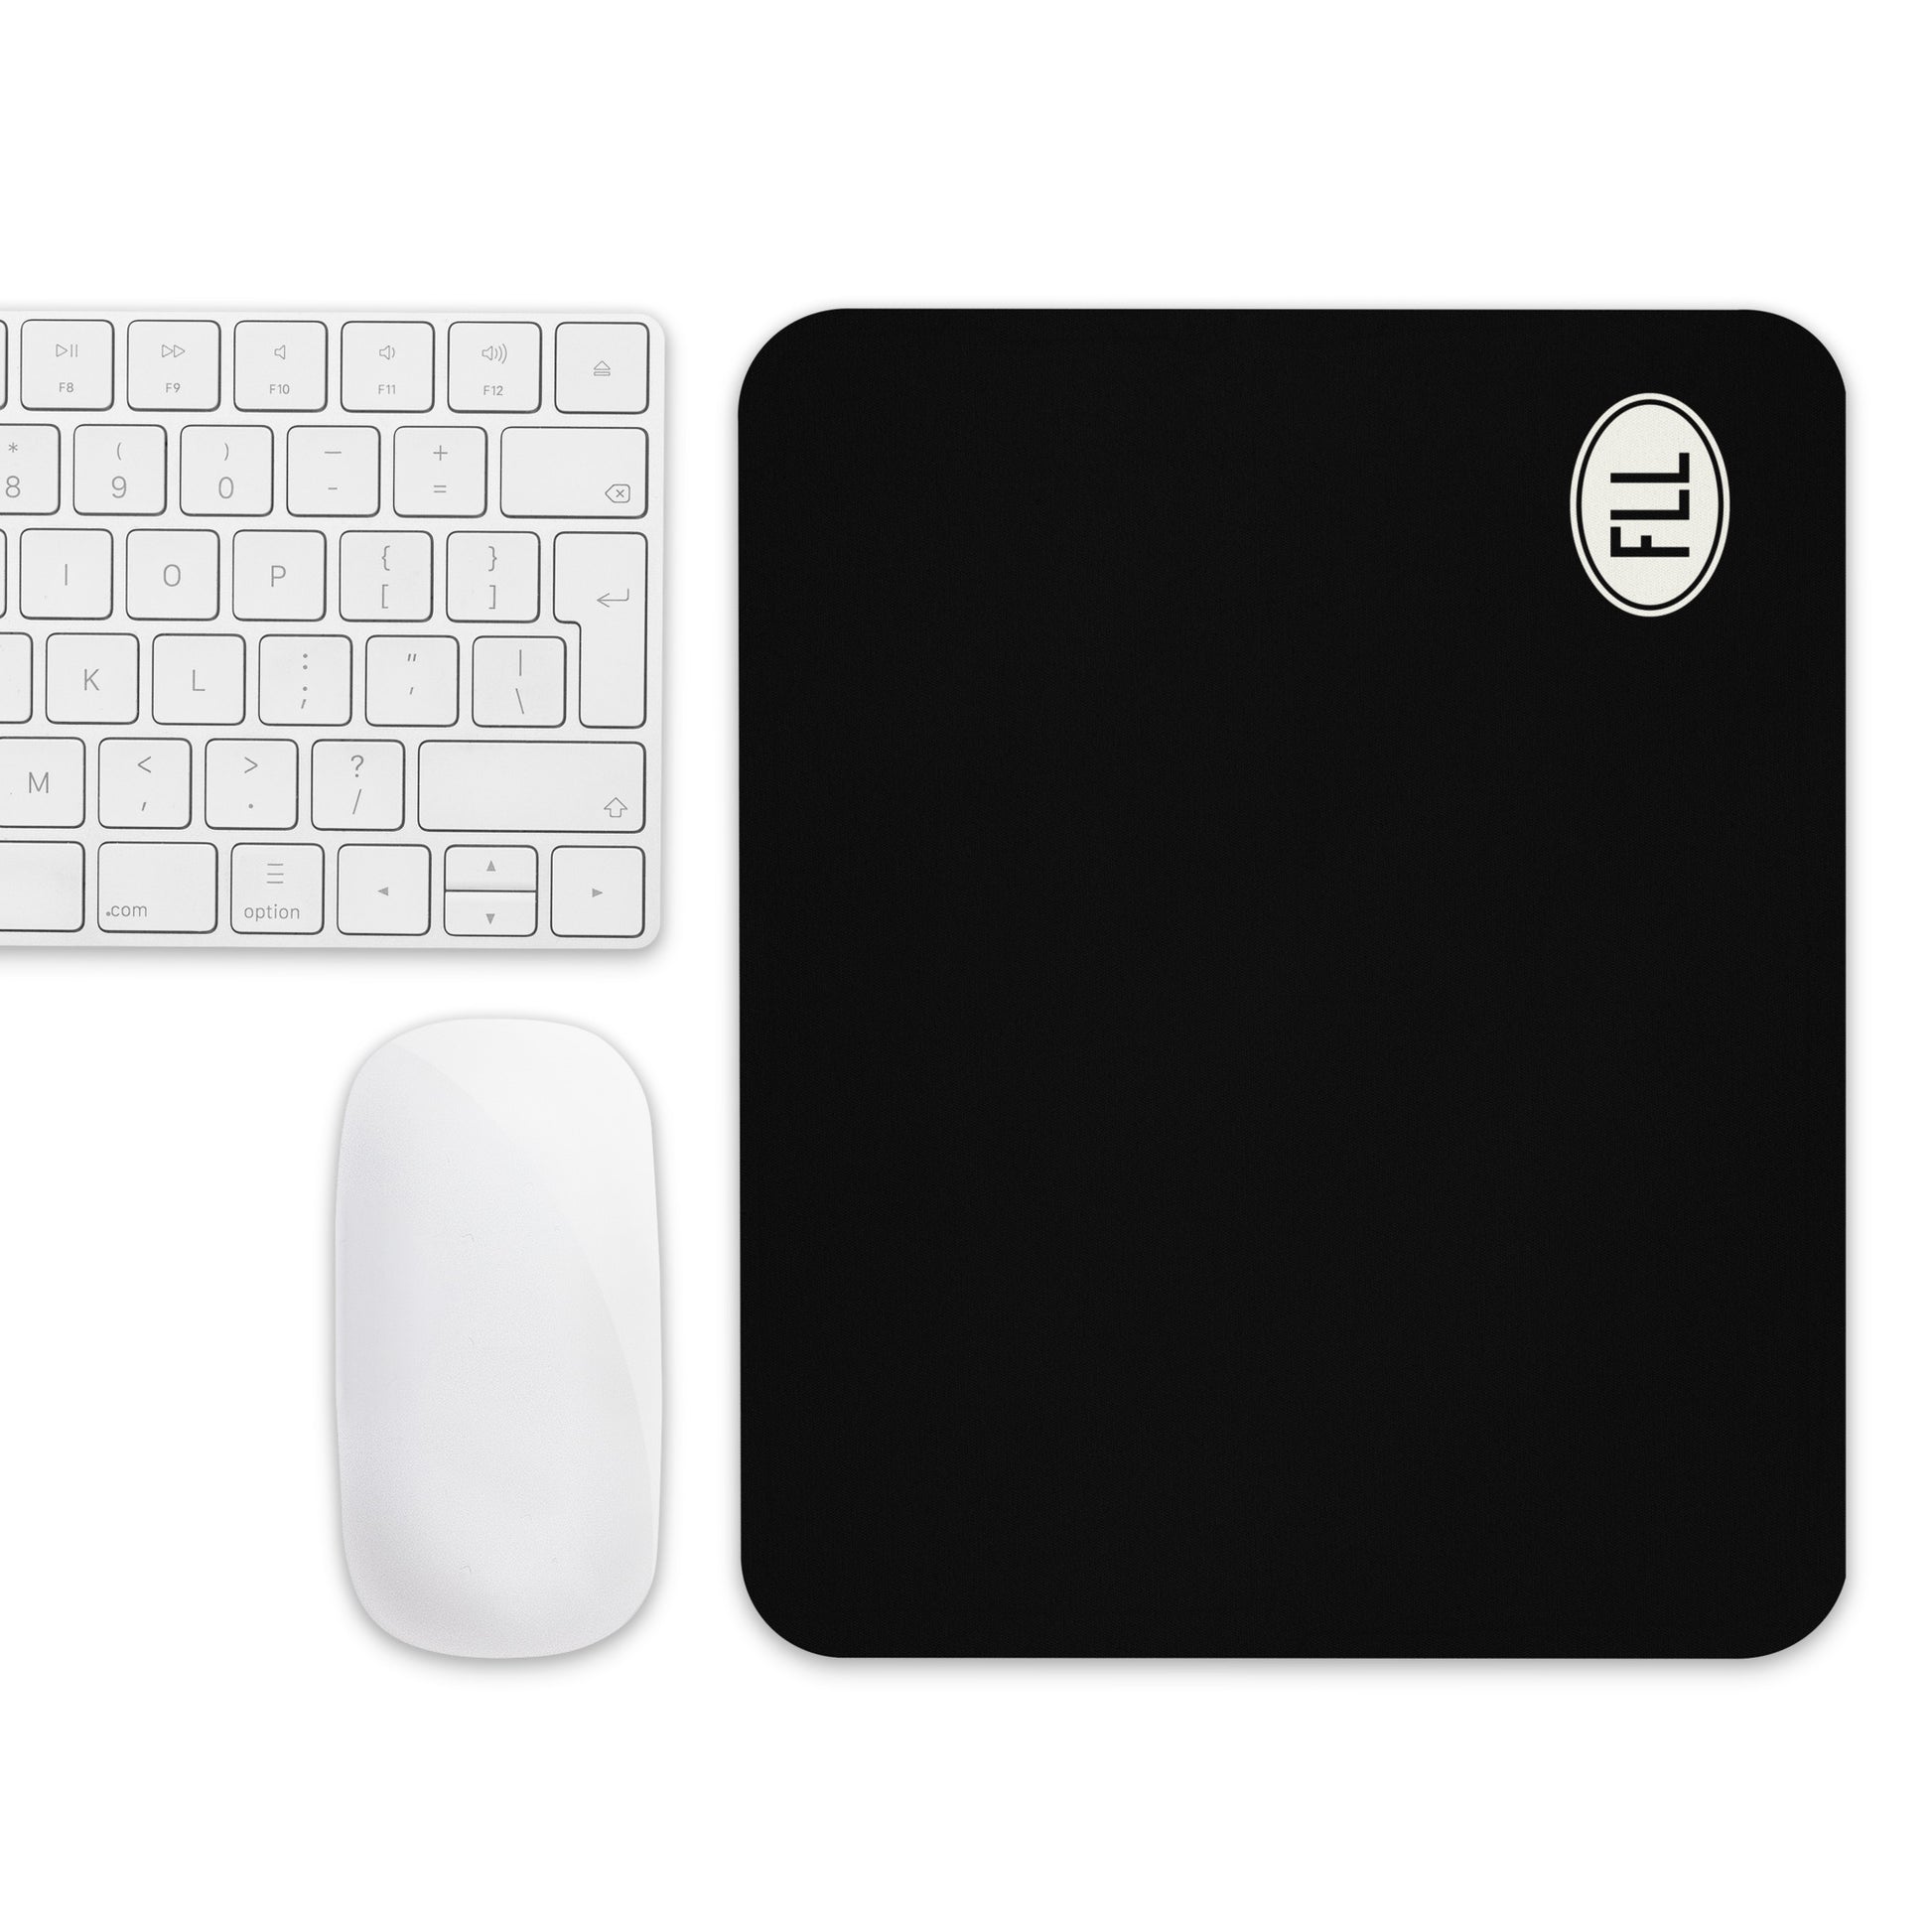 Unique Travel Gift Mouse Pad - White Oval • FLL Fort Lauderdale • YHM Designs - Image 04